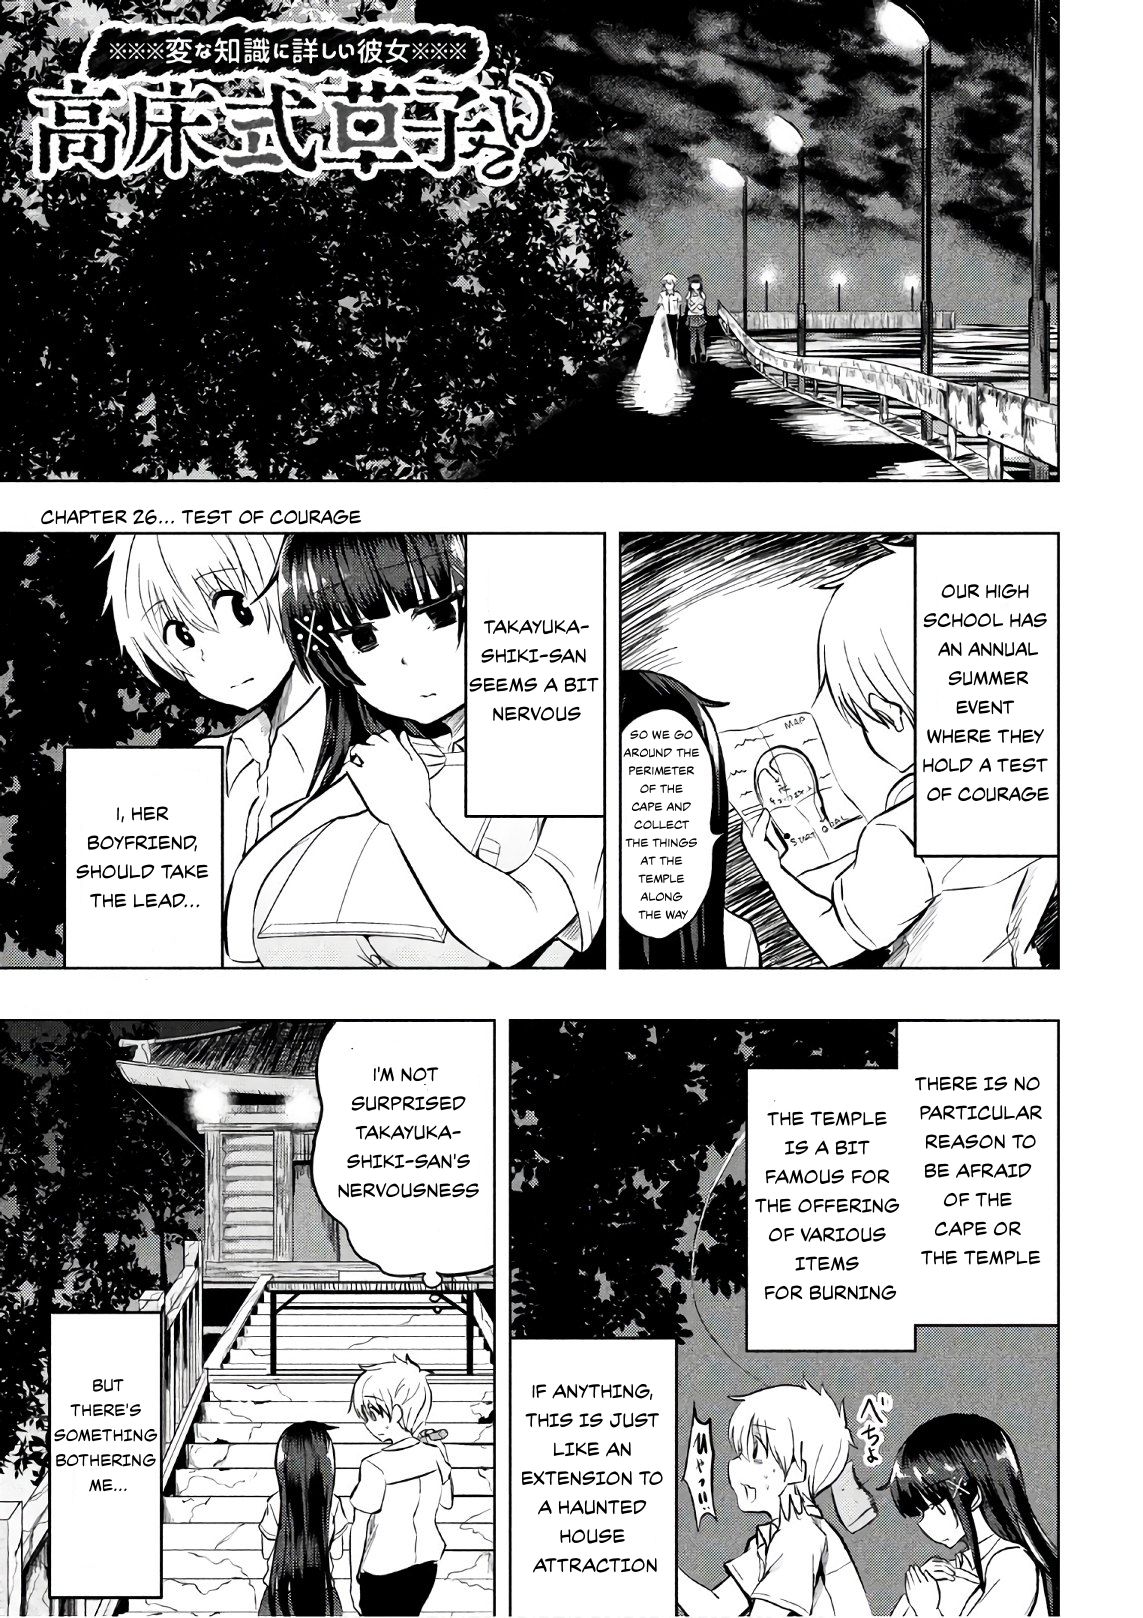 A Girl Who Is Very Well-Informed About Weird Knowledge, Takayukashiki Souko-San Chapter 26: Test Of Courage - Picture 1